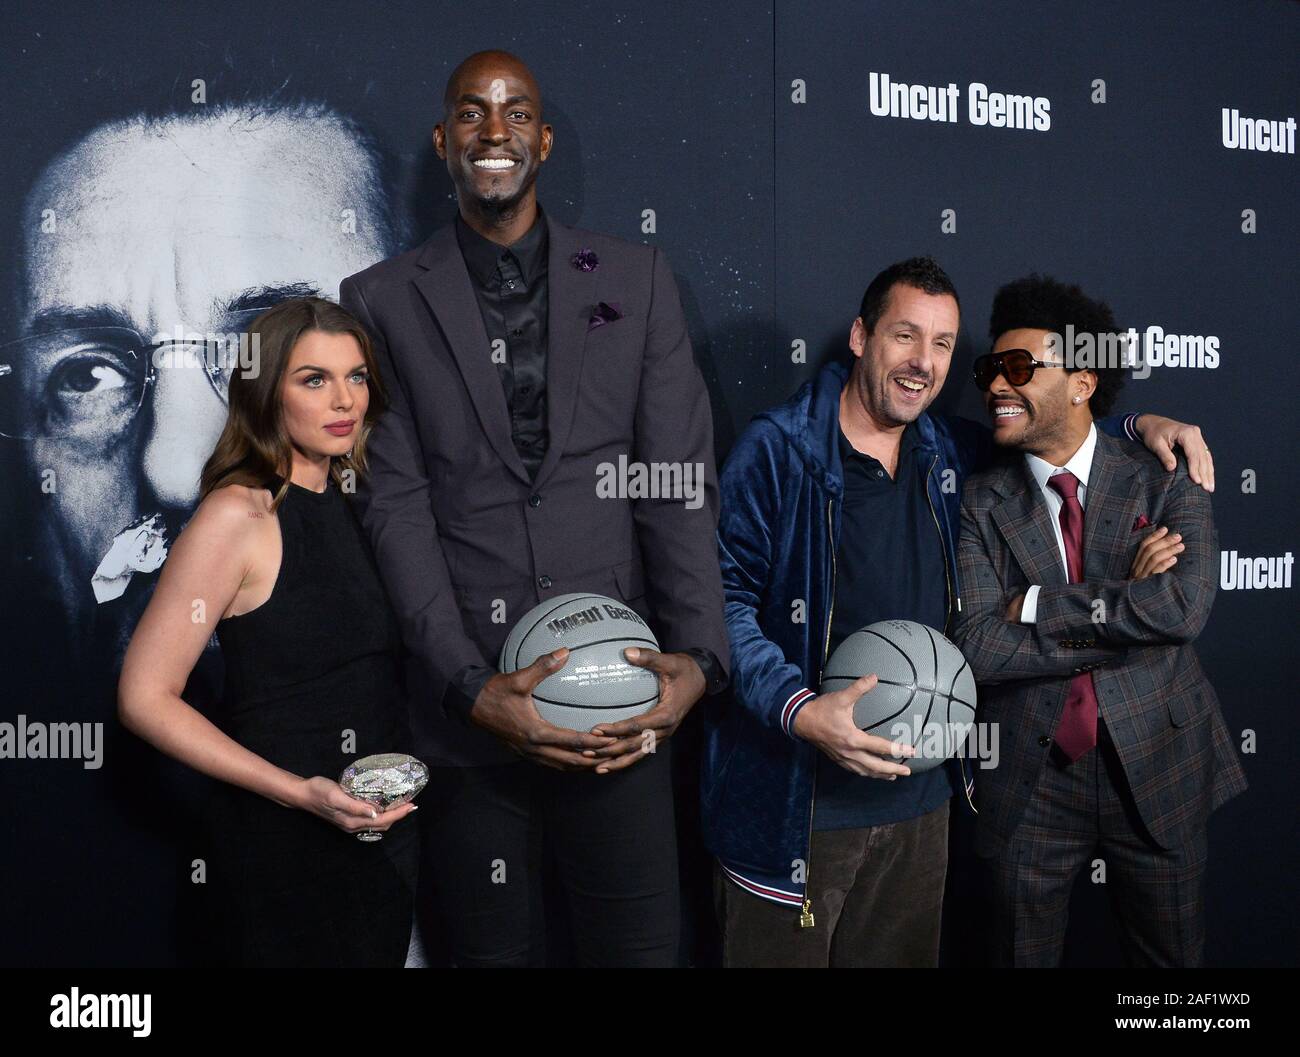 Hollywood, California, USA. 12th Dec, 2019. Cast members Julia Fox, Kevin Garnett. Adam Sandler and The Weekend (L-R) attend the premiere of the motion picture crime thriller 'Uncut Gems' at the ArcLight Cinema Dome in the Hollywood section of Los Angeles on Wednesday, December 11, 2019. Storyline: Howard Ratner (Adam Sandler), a charismatic New York City jeweler always on the lookout for the next big score. Credit: UPI/Alamy Live News Stock Photo